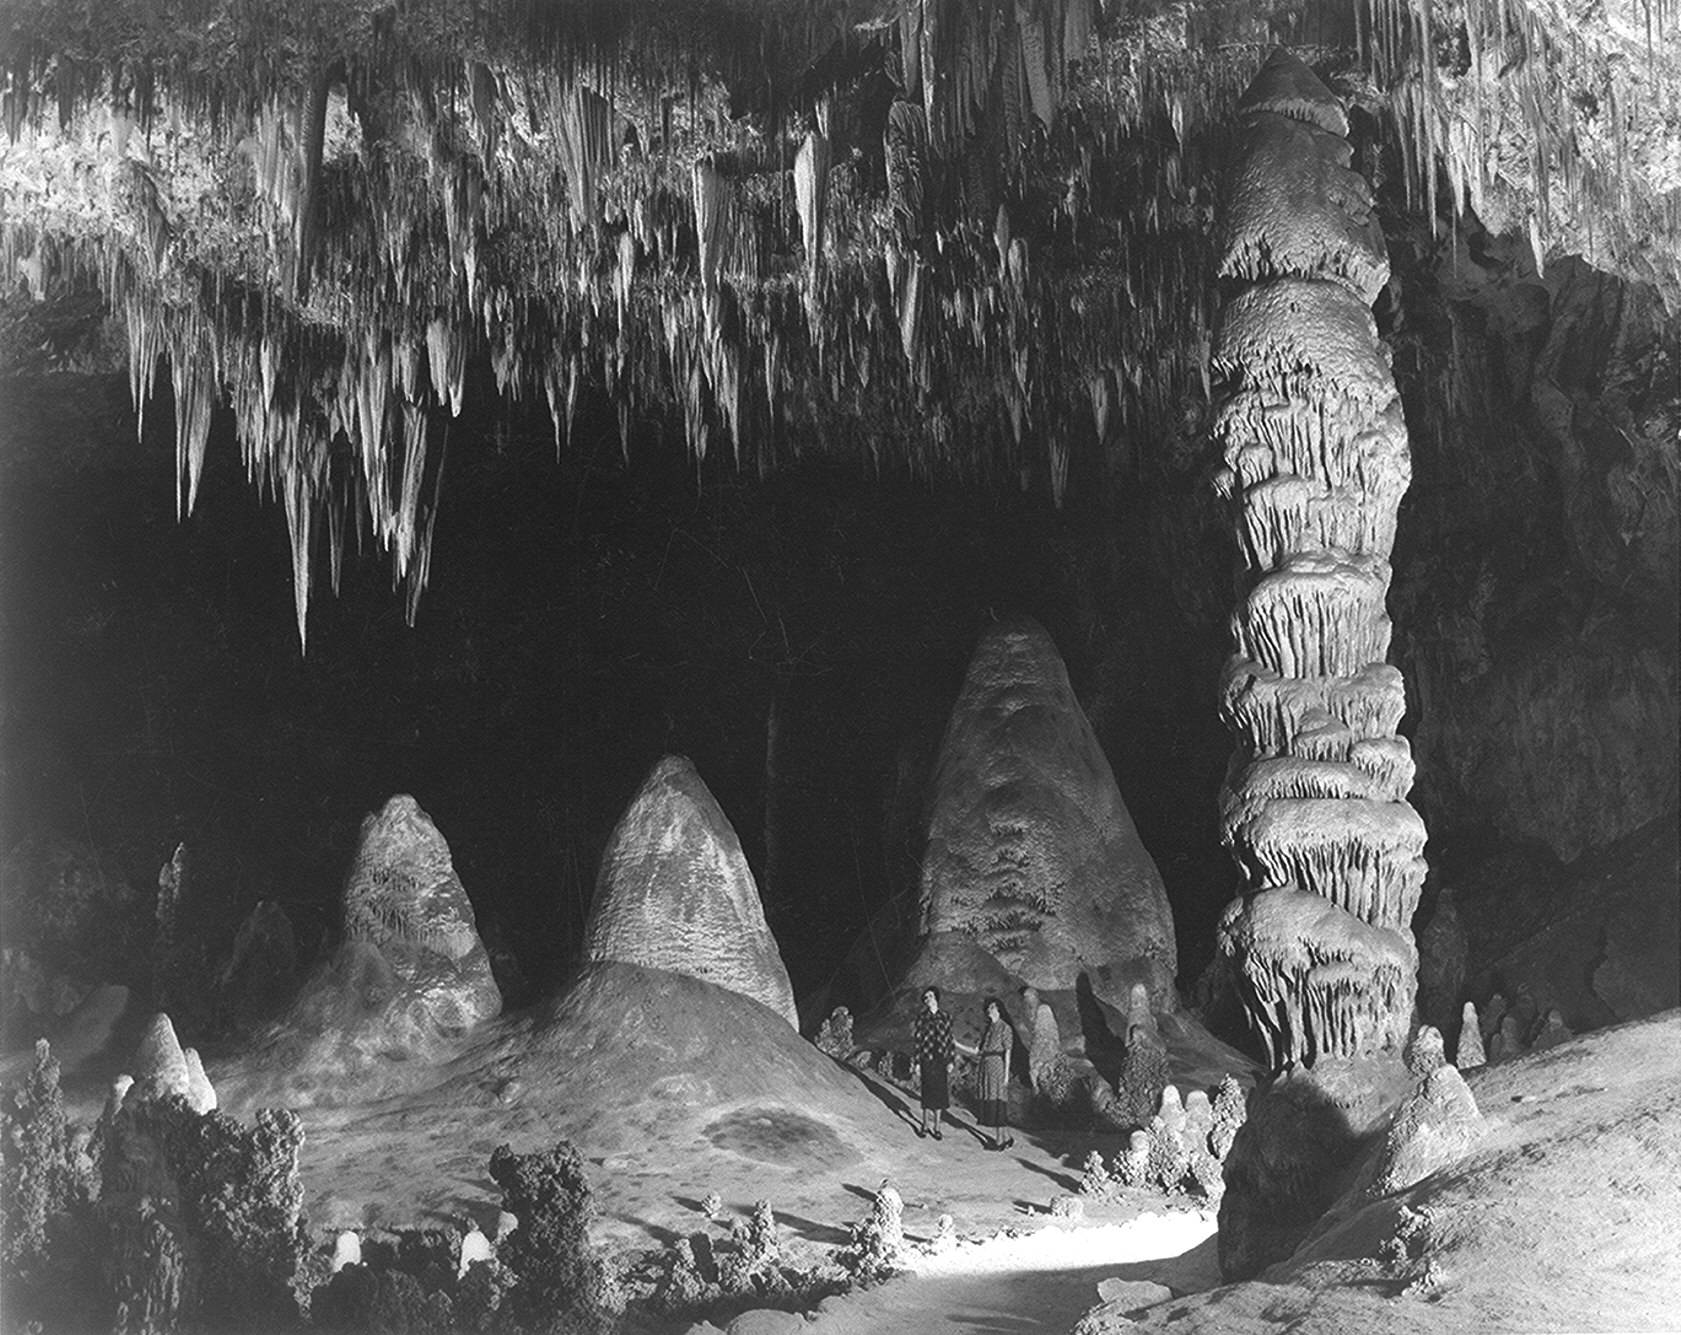 CARLSBAD CAVERNS NATIONAL PARK NEW MEXICO By Ansel Adams Giclee Repro 18x24